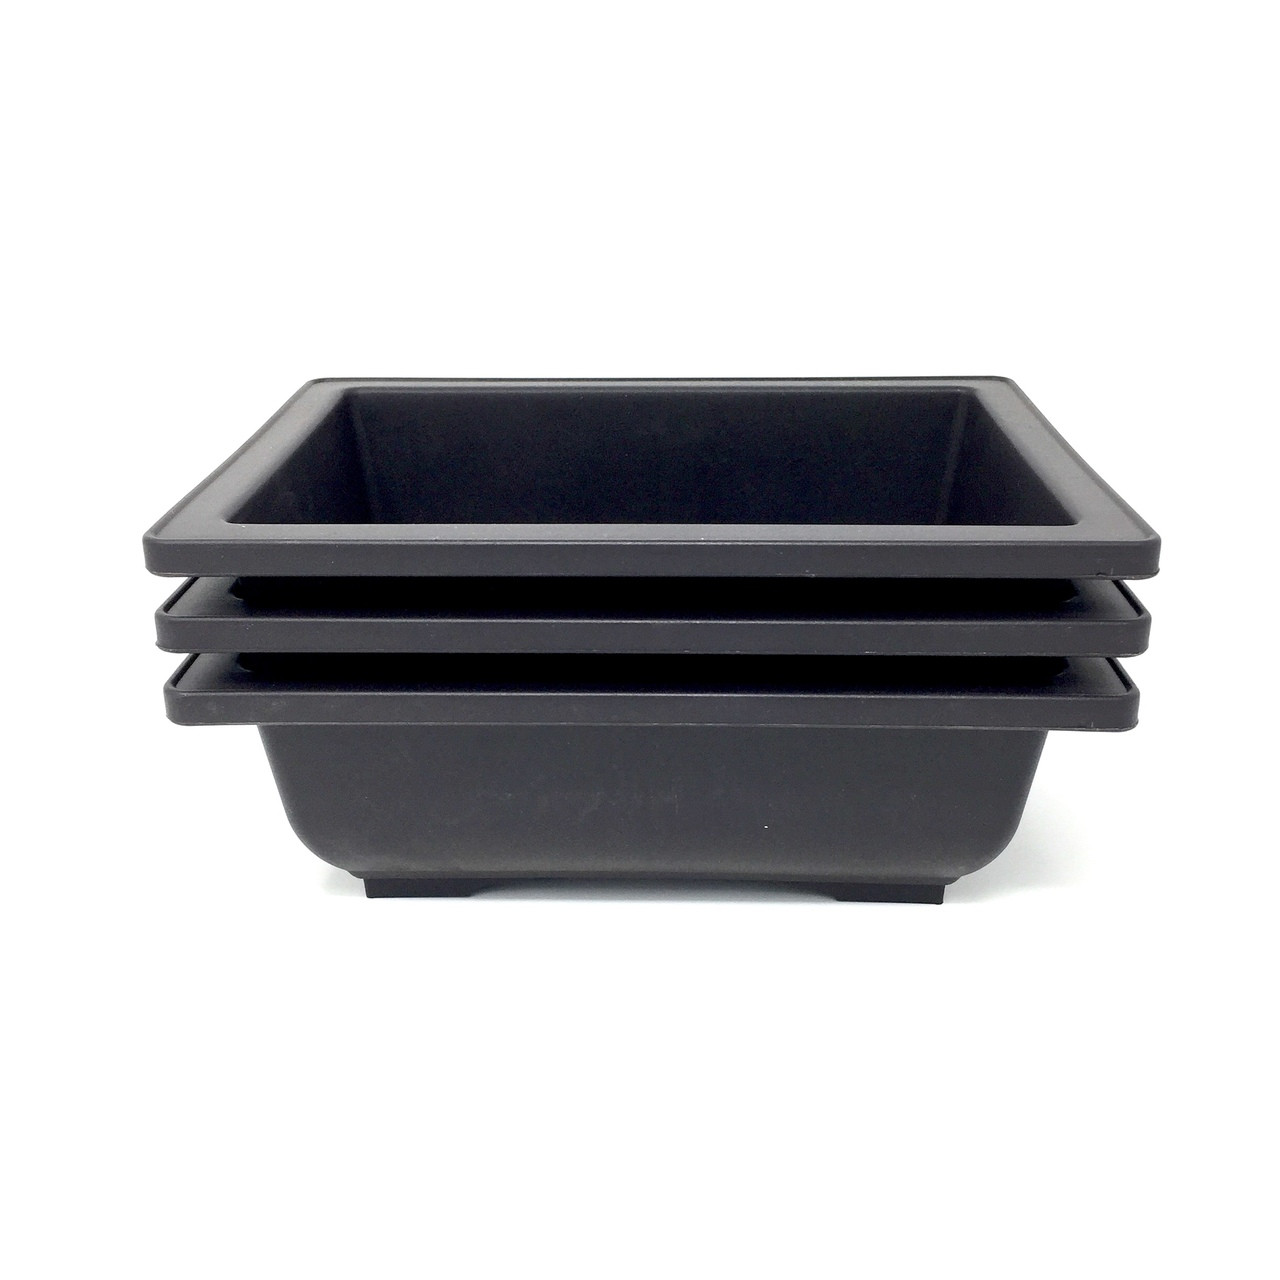 NEW ITEM! 8 Deep Glazed Ceramic Bonsai Pot. Choose from several styles and  colo